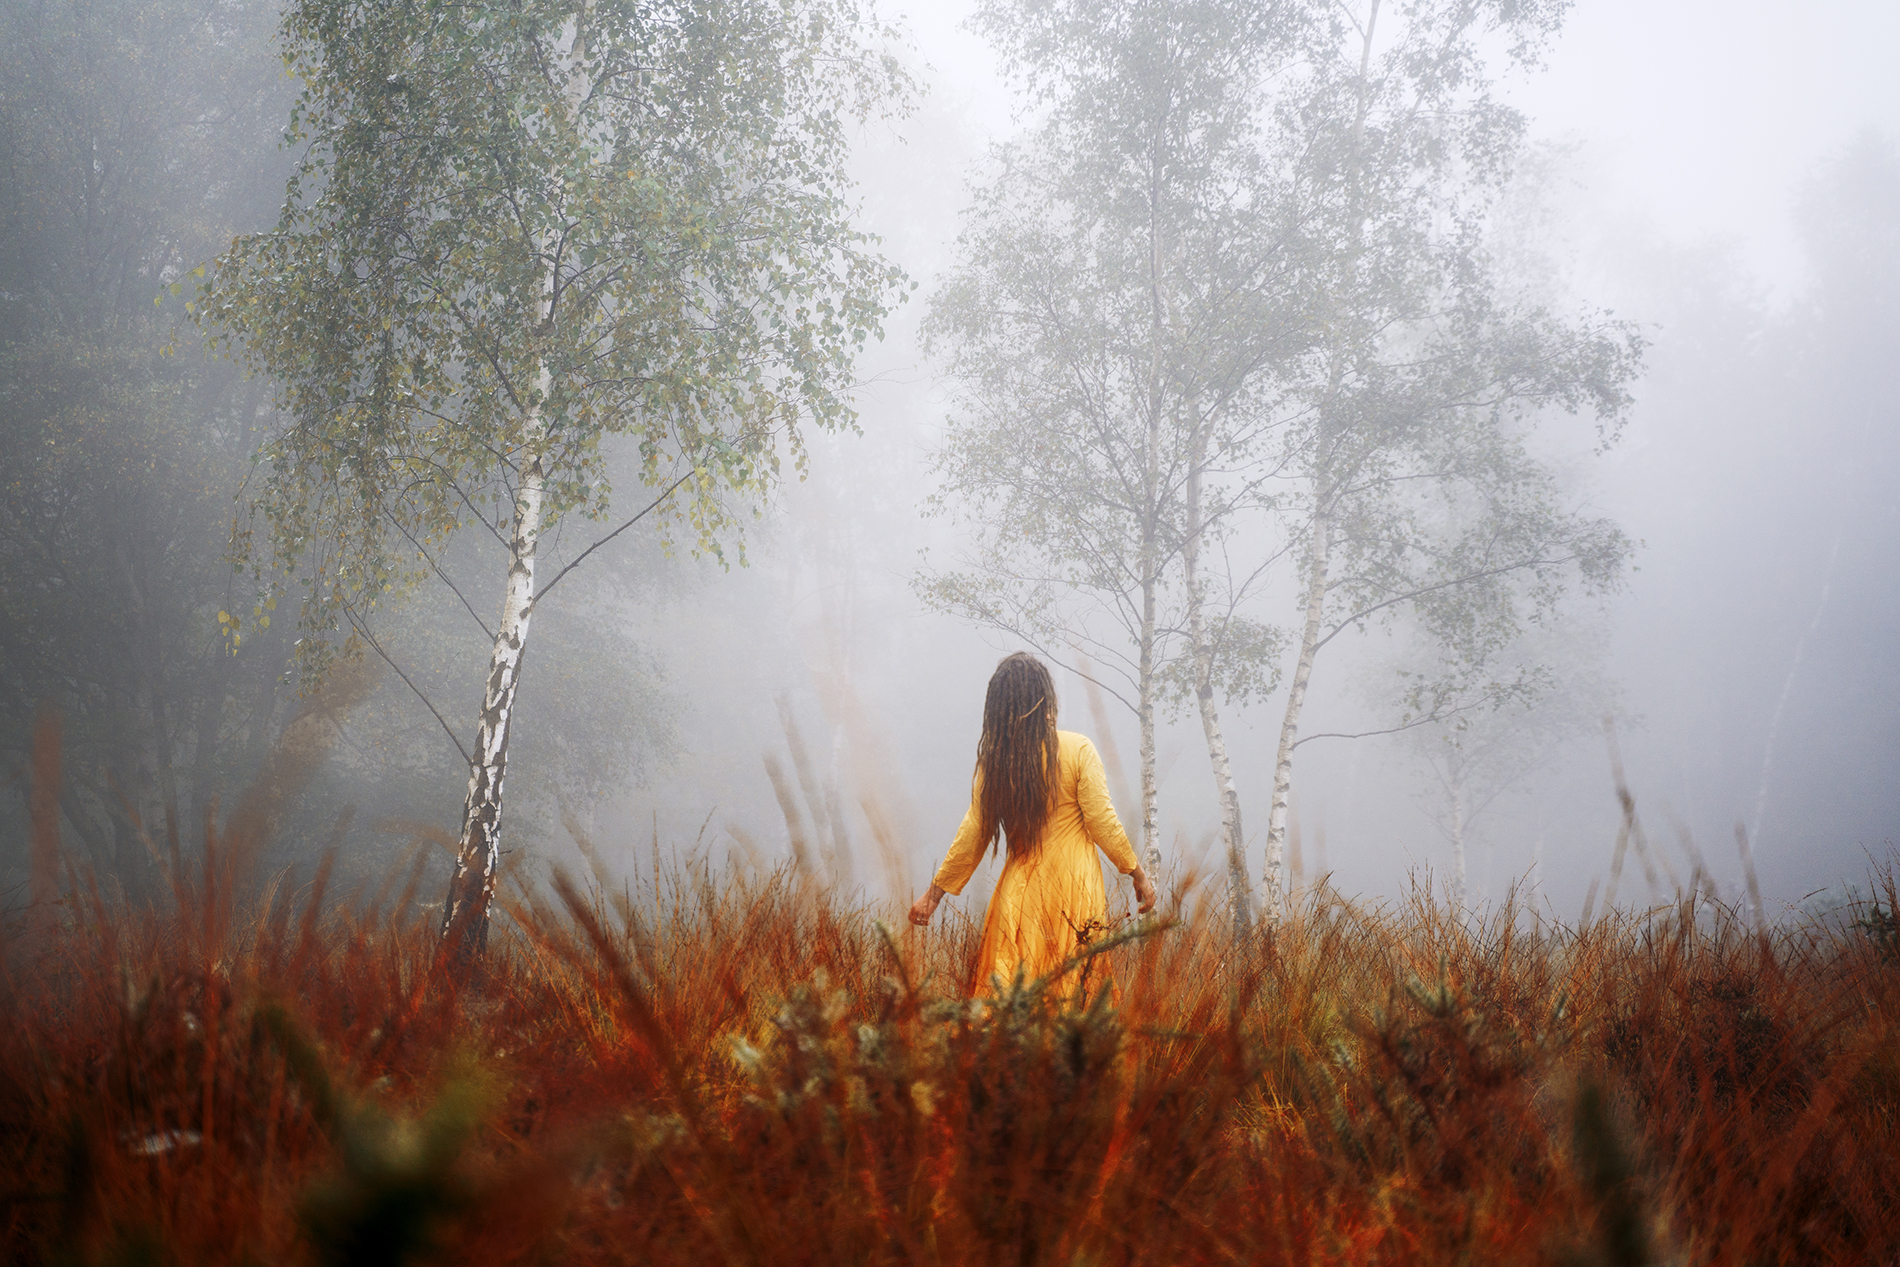 Self portrait of a woman wandering through foggy fields at an early morning.